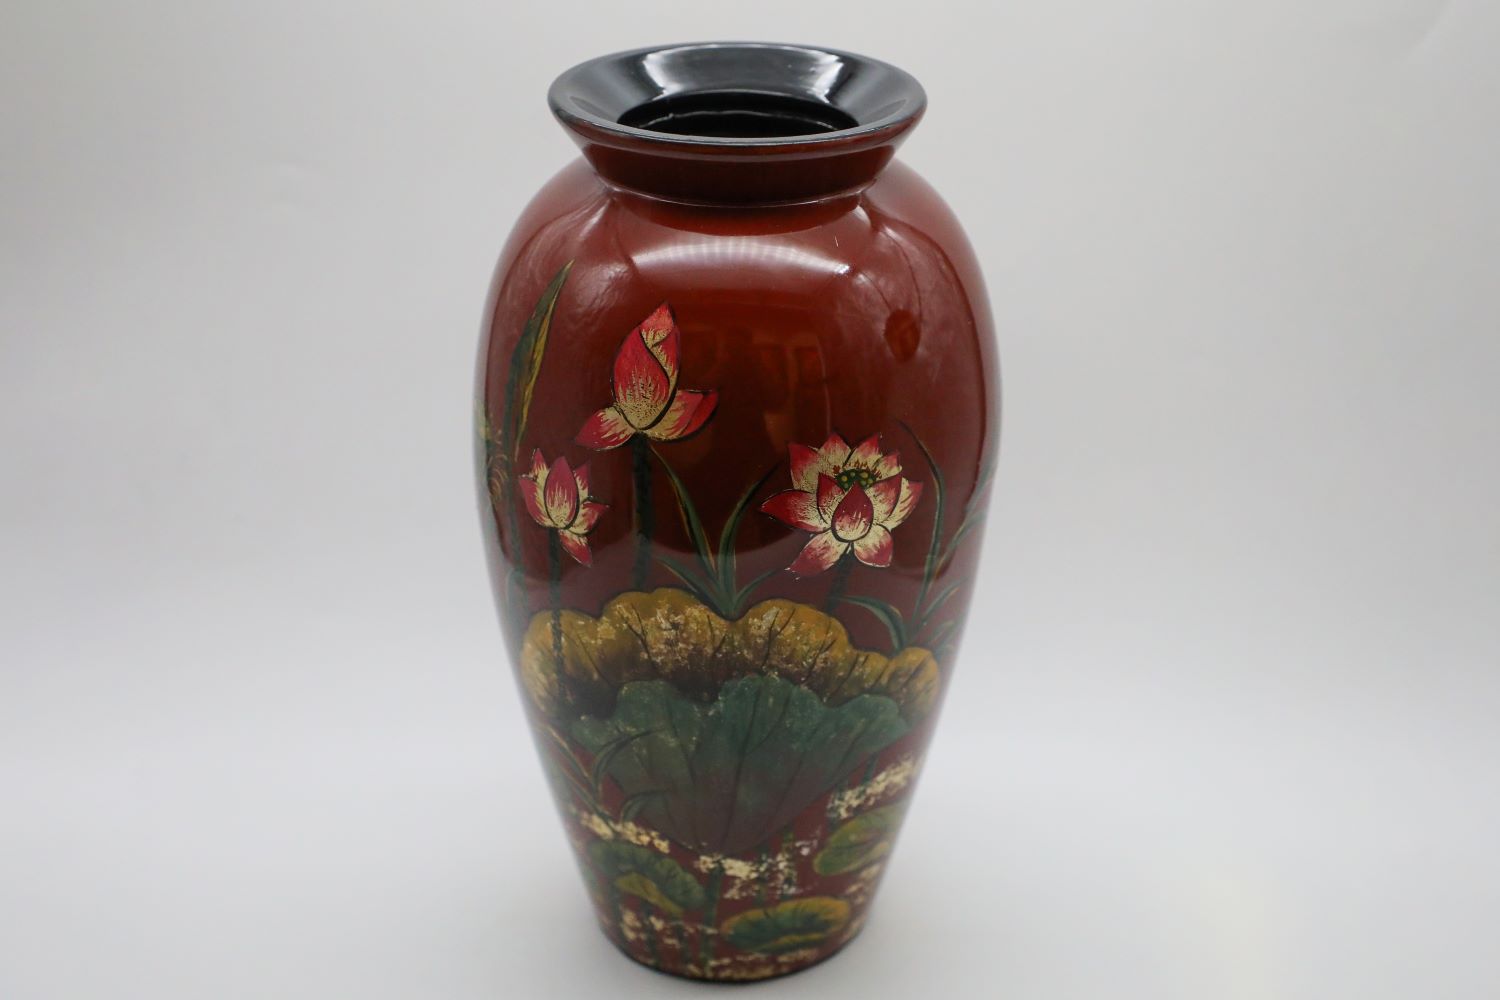 Vase of Early Dew 06 - Vietnamese Ceramic Vase by Artist Dinh Thi Thanh